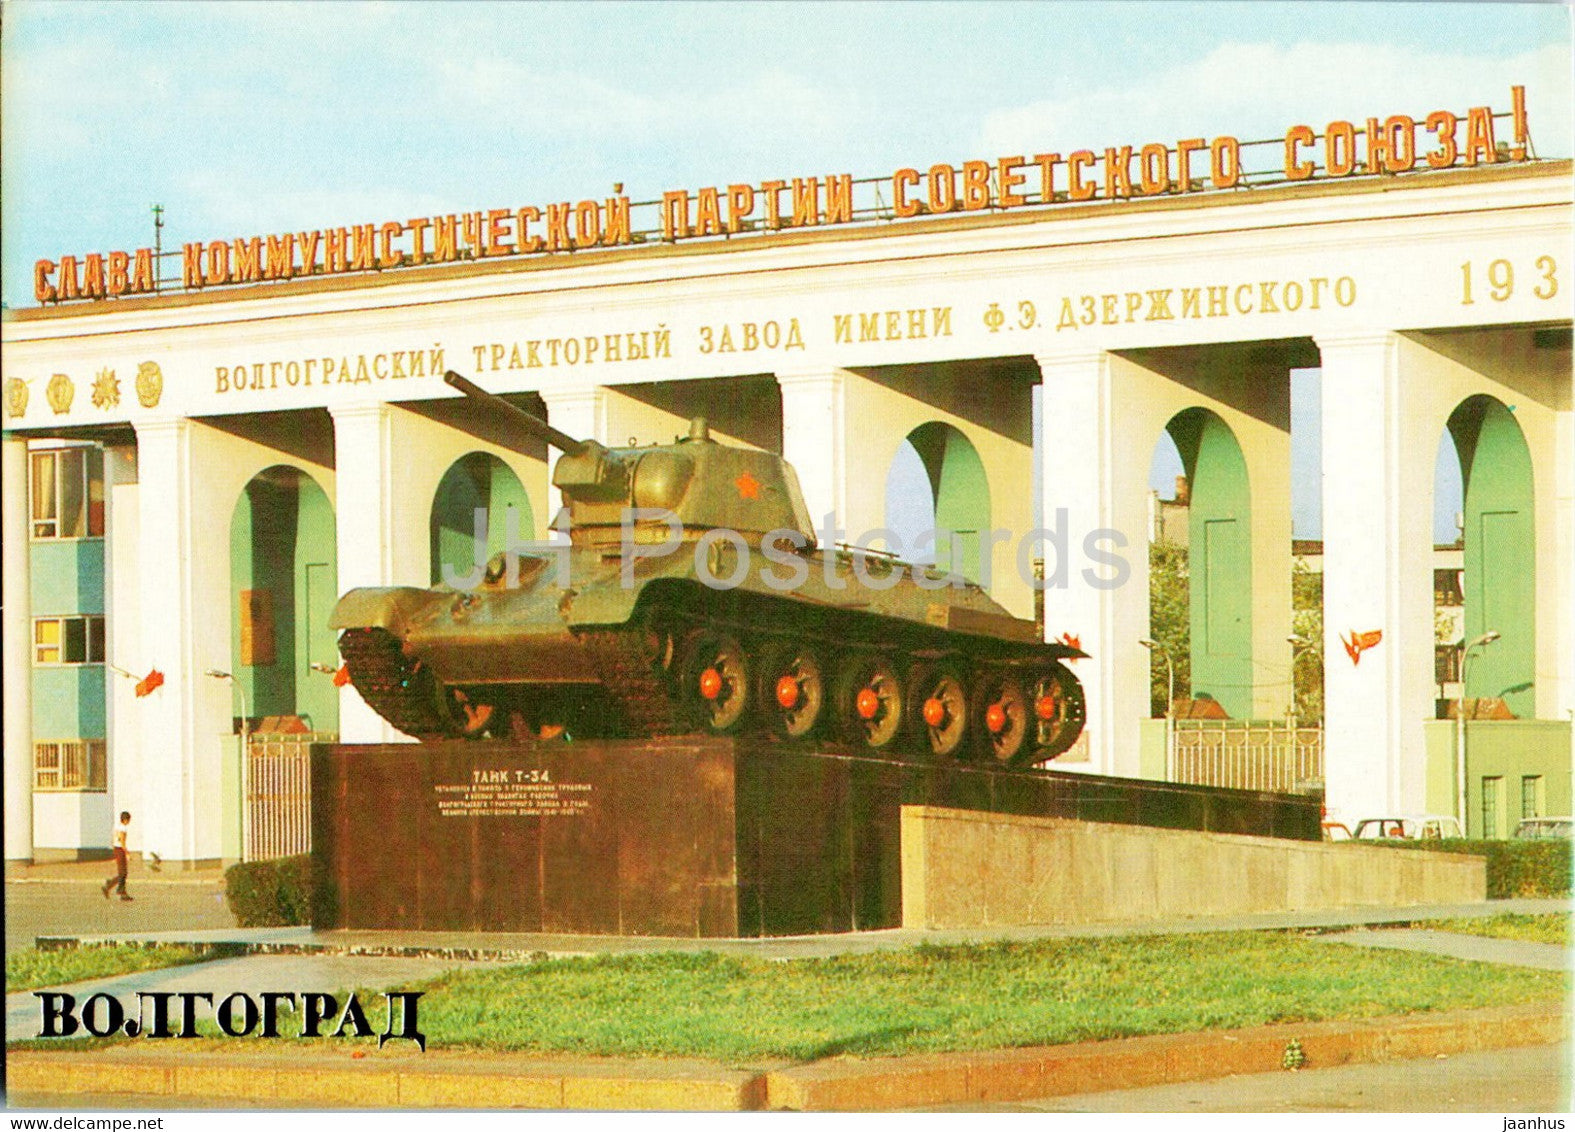 Volgograd - Tank T-34 at Dzerzhinsky square infront of tractor plant - 1982 - Russia USSR - unused - JH Postcards